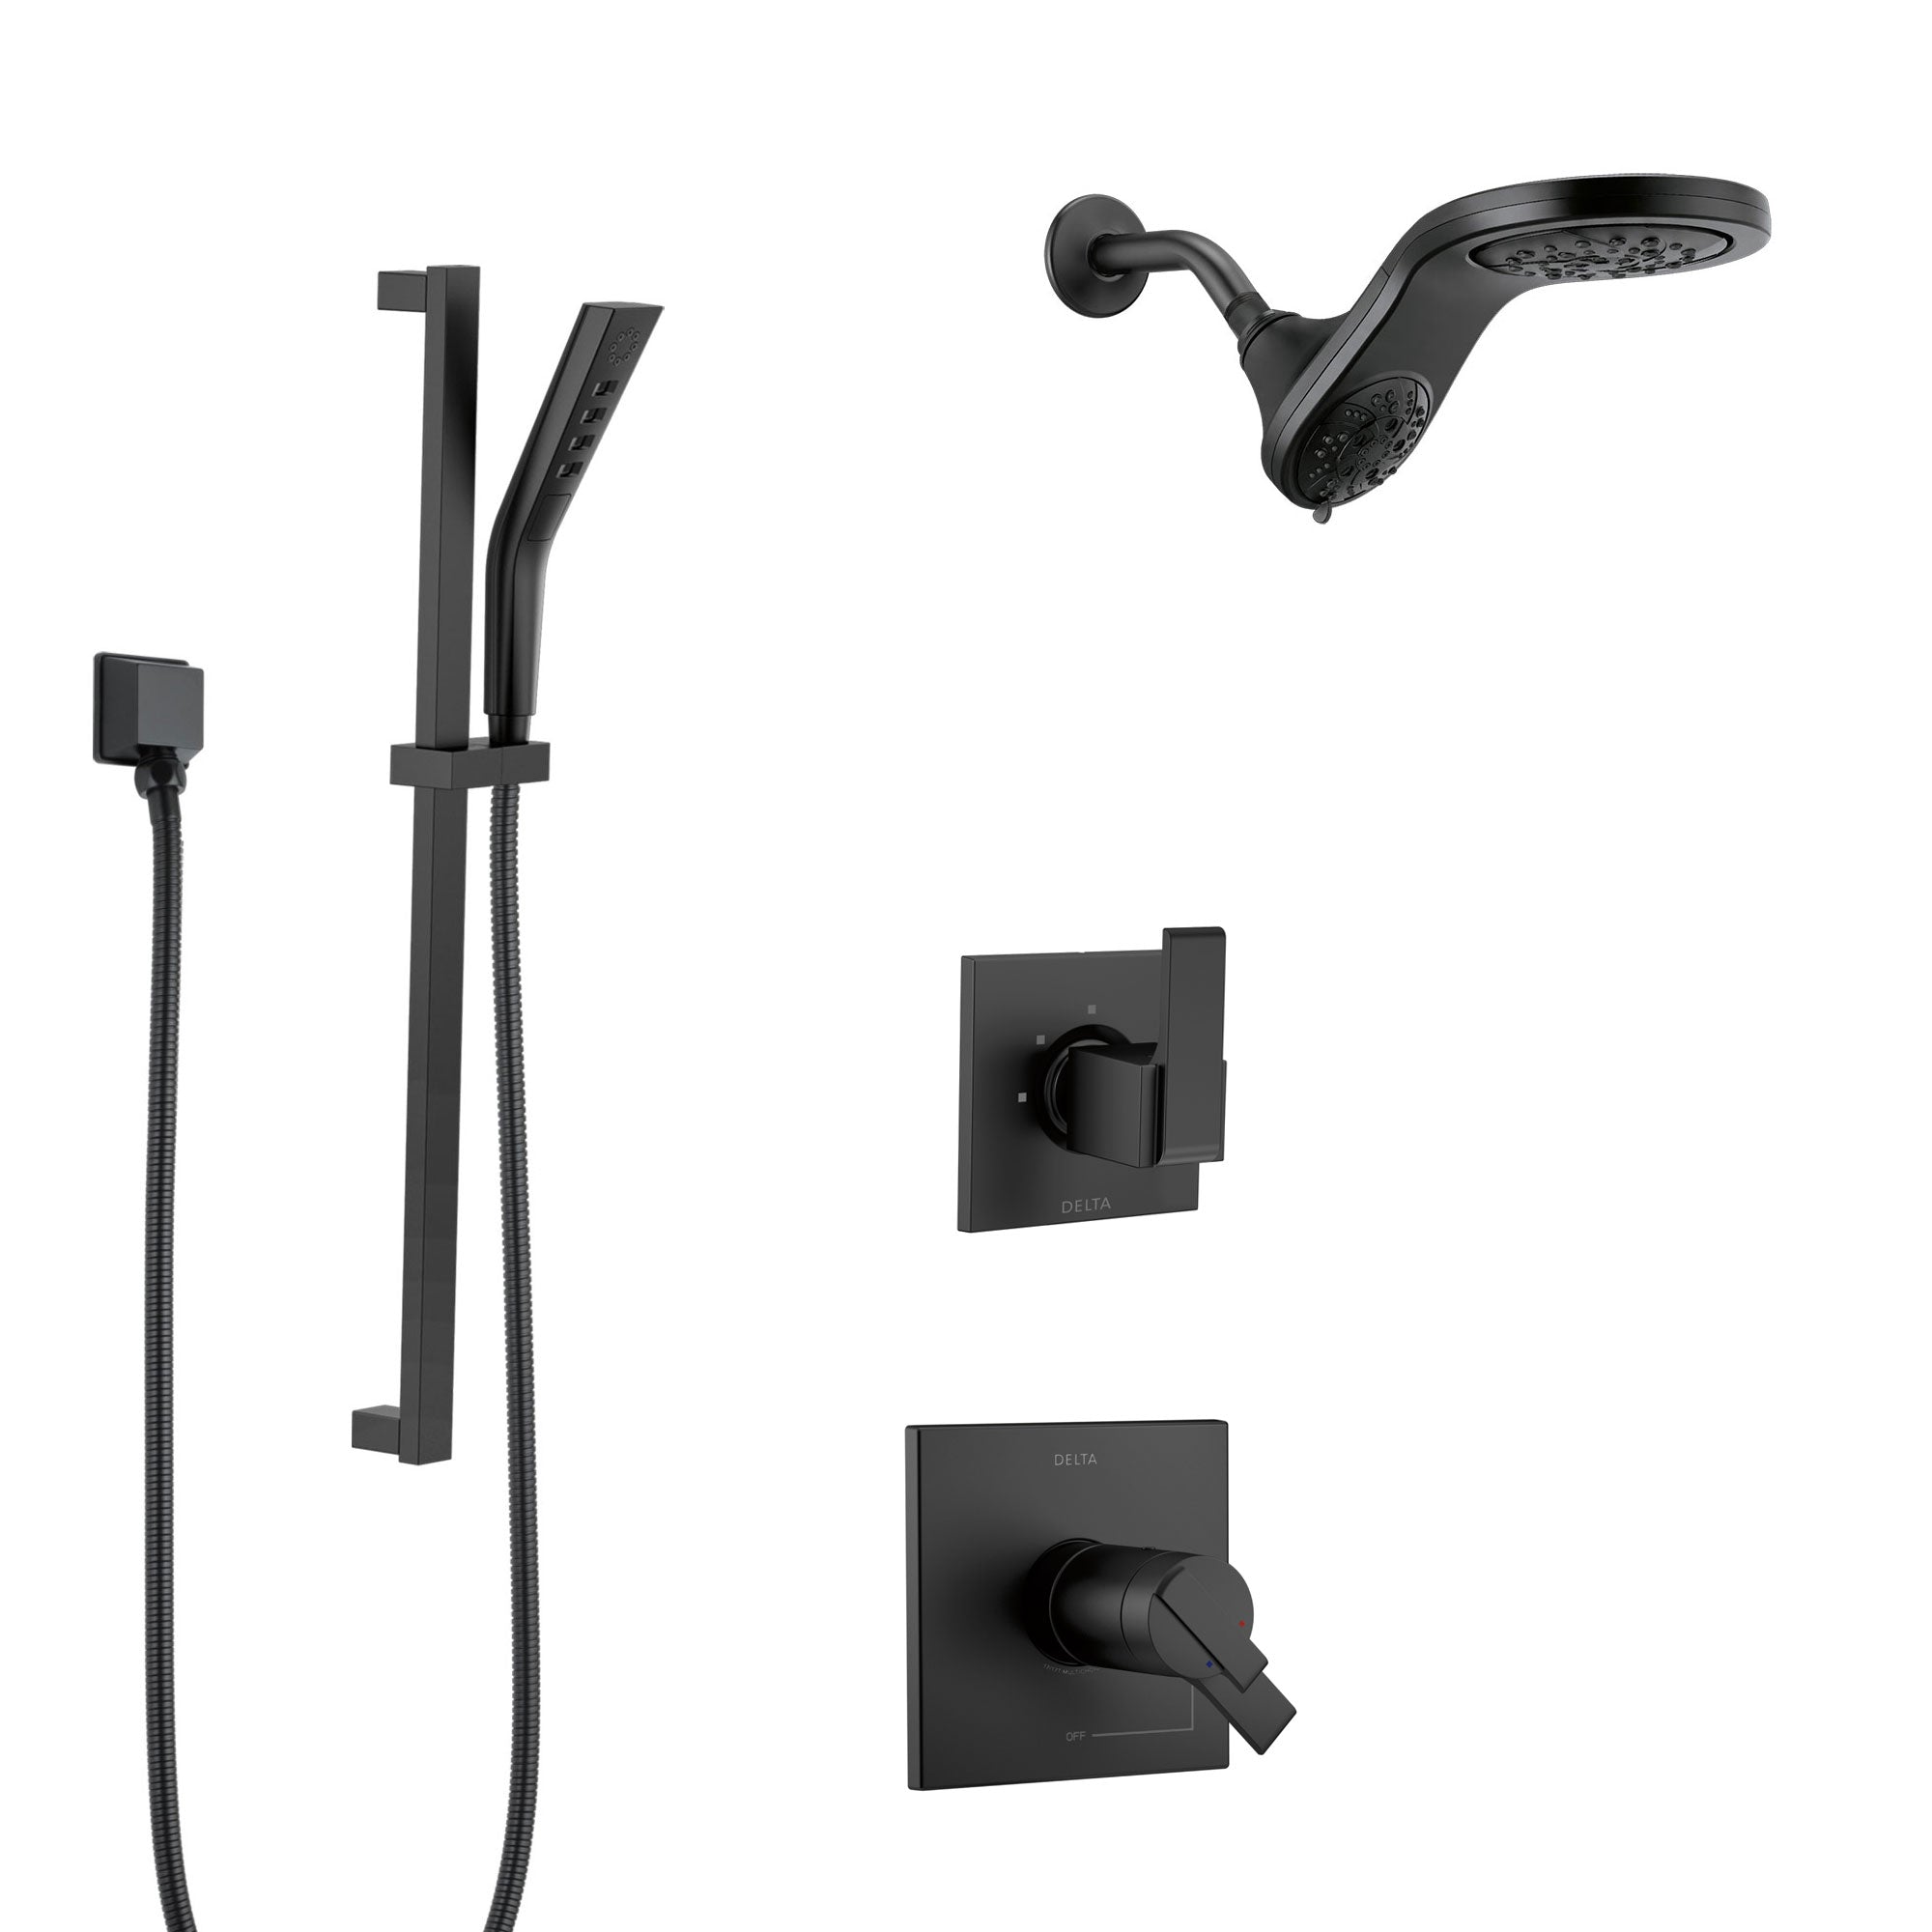 Delta Ara Matte Black Finish Modern Thermostatic Shower Diverter System with HydroRain Dual Showerhead and Hand Shower on Slidebar SS17T673BL13